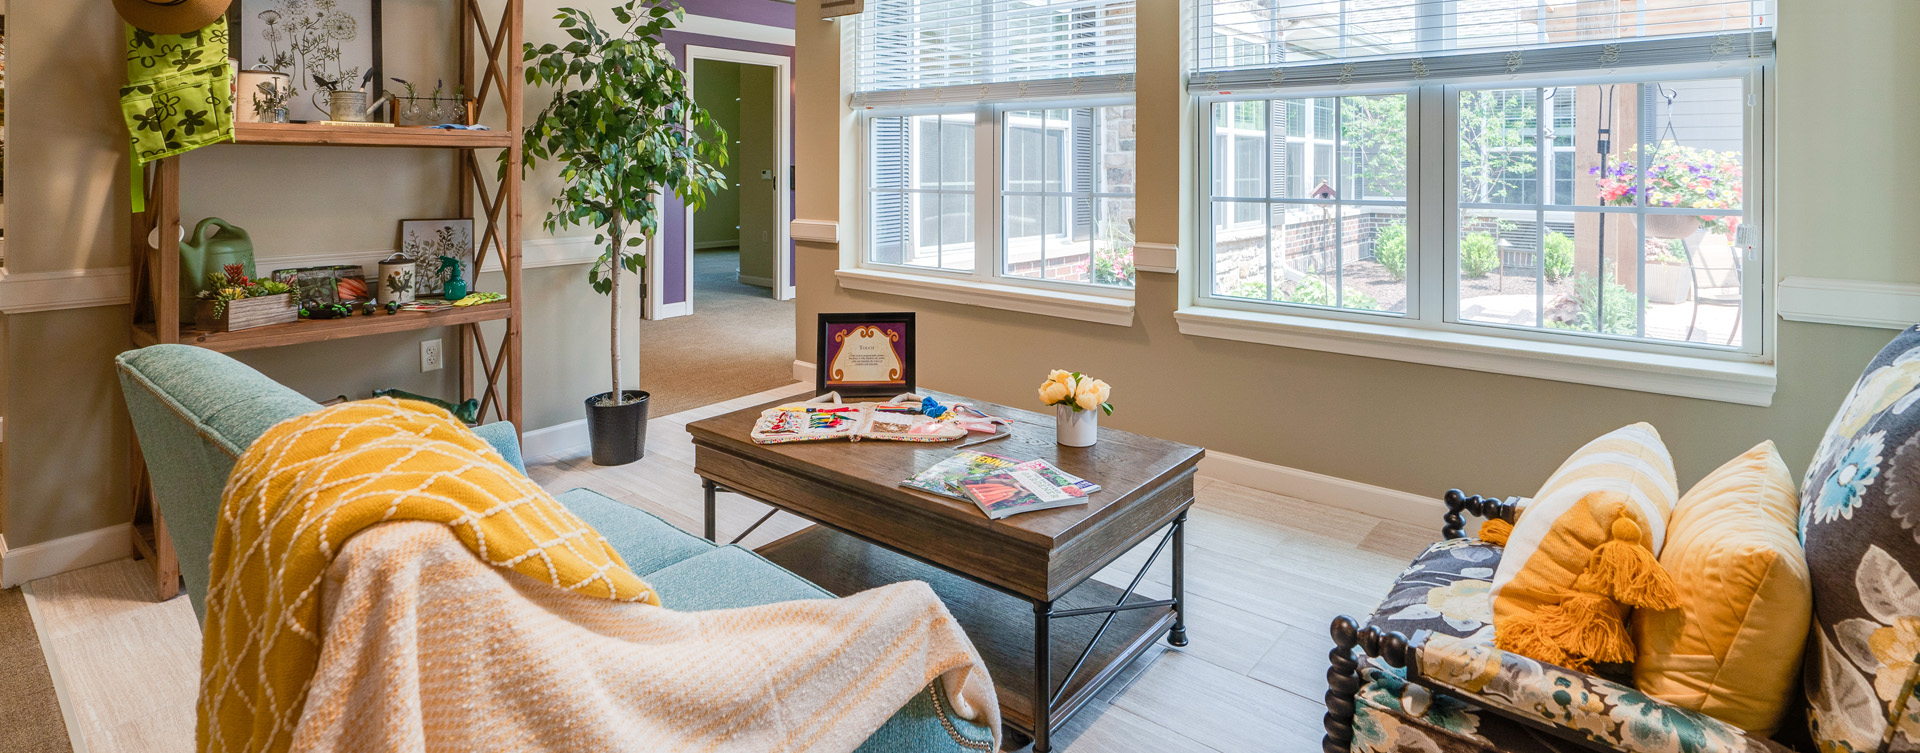 Relax in the warmth of the sunroom at Bickford of Chesapeake